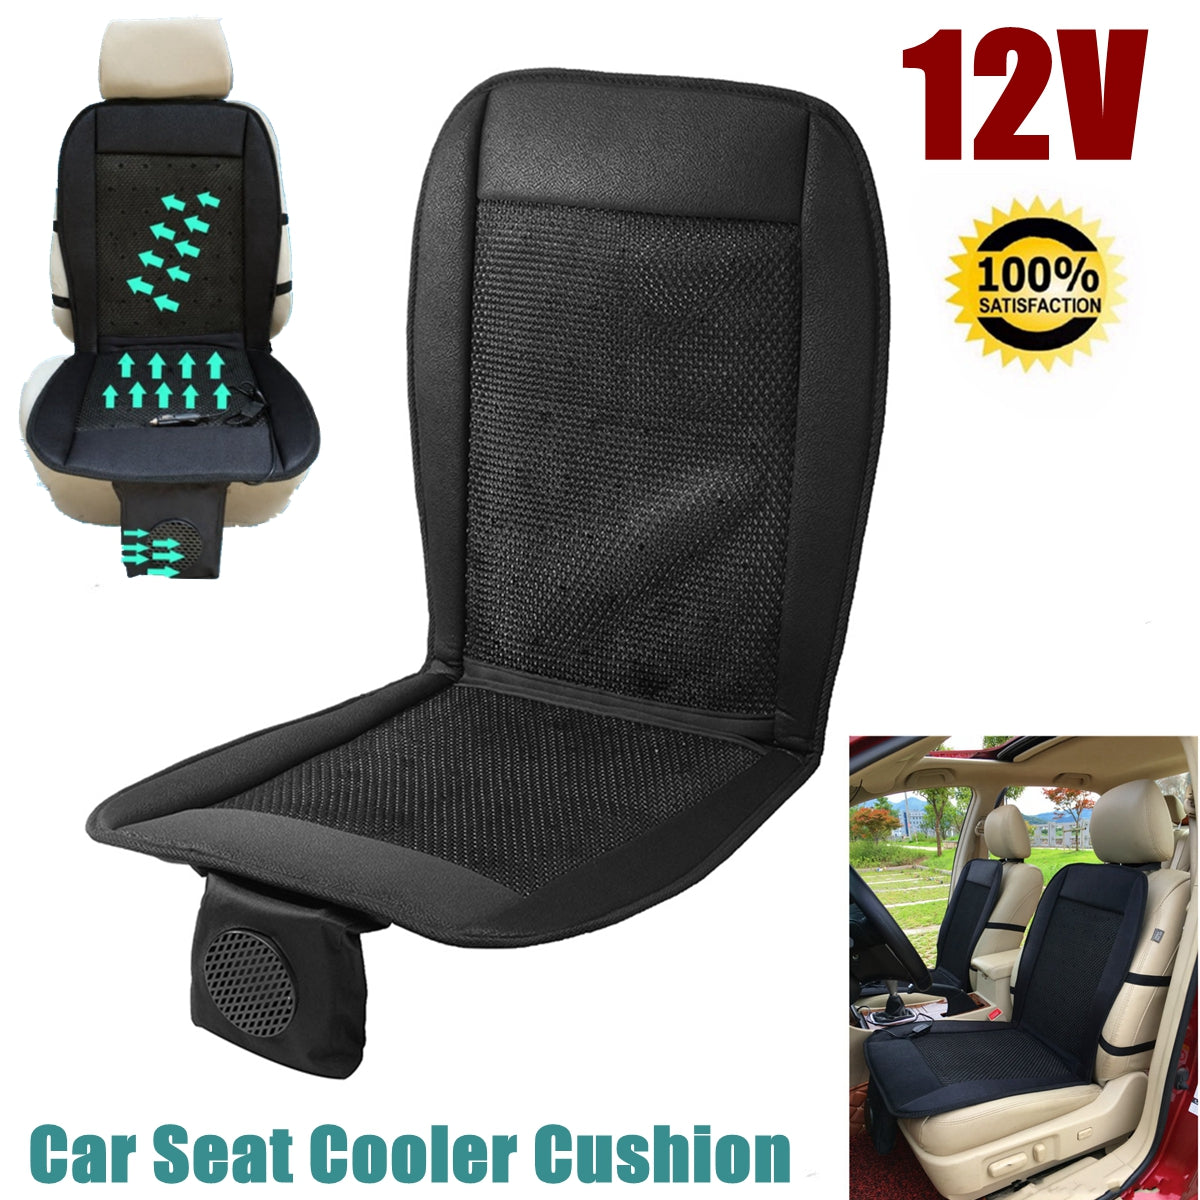 Car Seat Cushion Cover Conditioned Cooler 12V